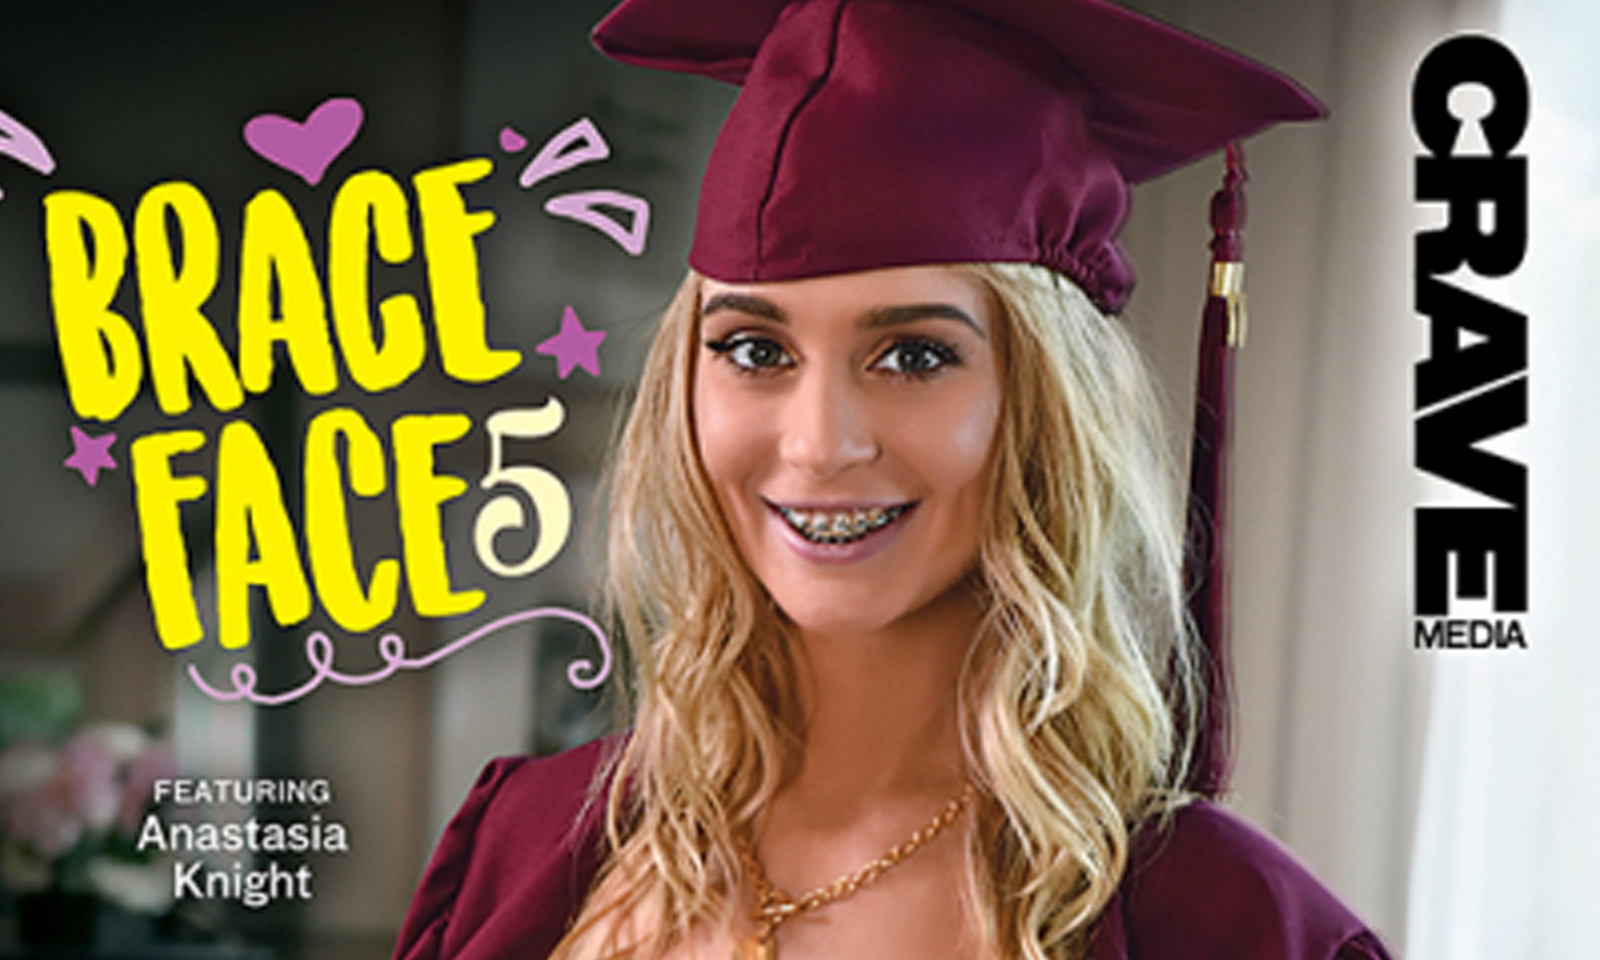 Sexy Barely Legal Teens Go for the Silver in 'Brace Face 5'